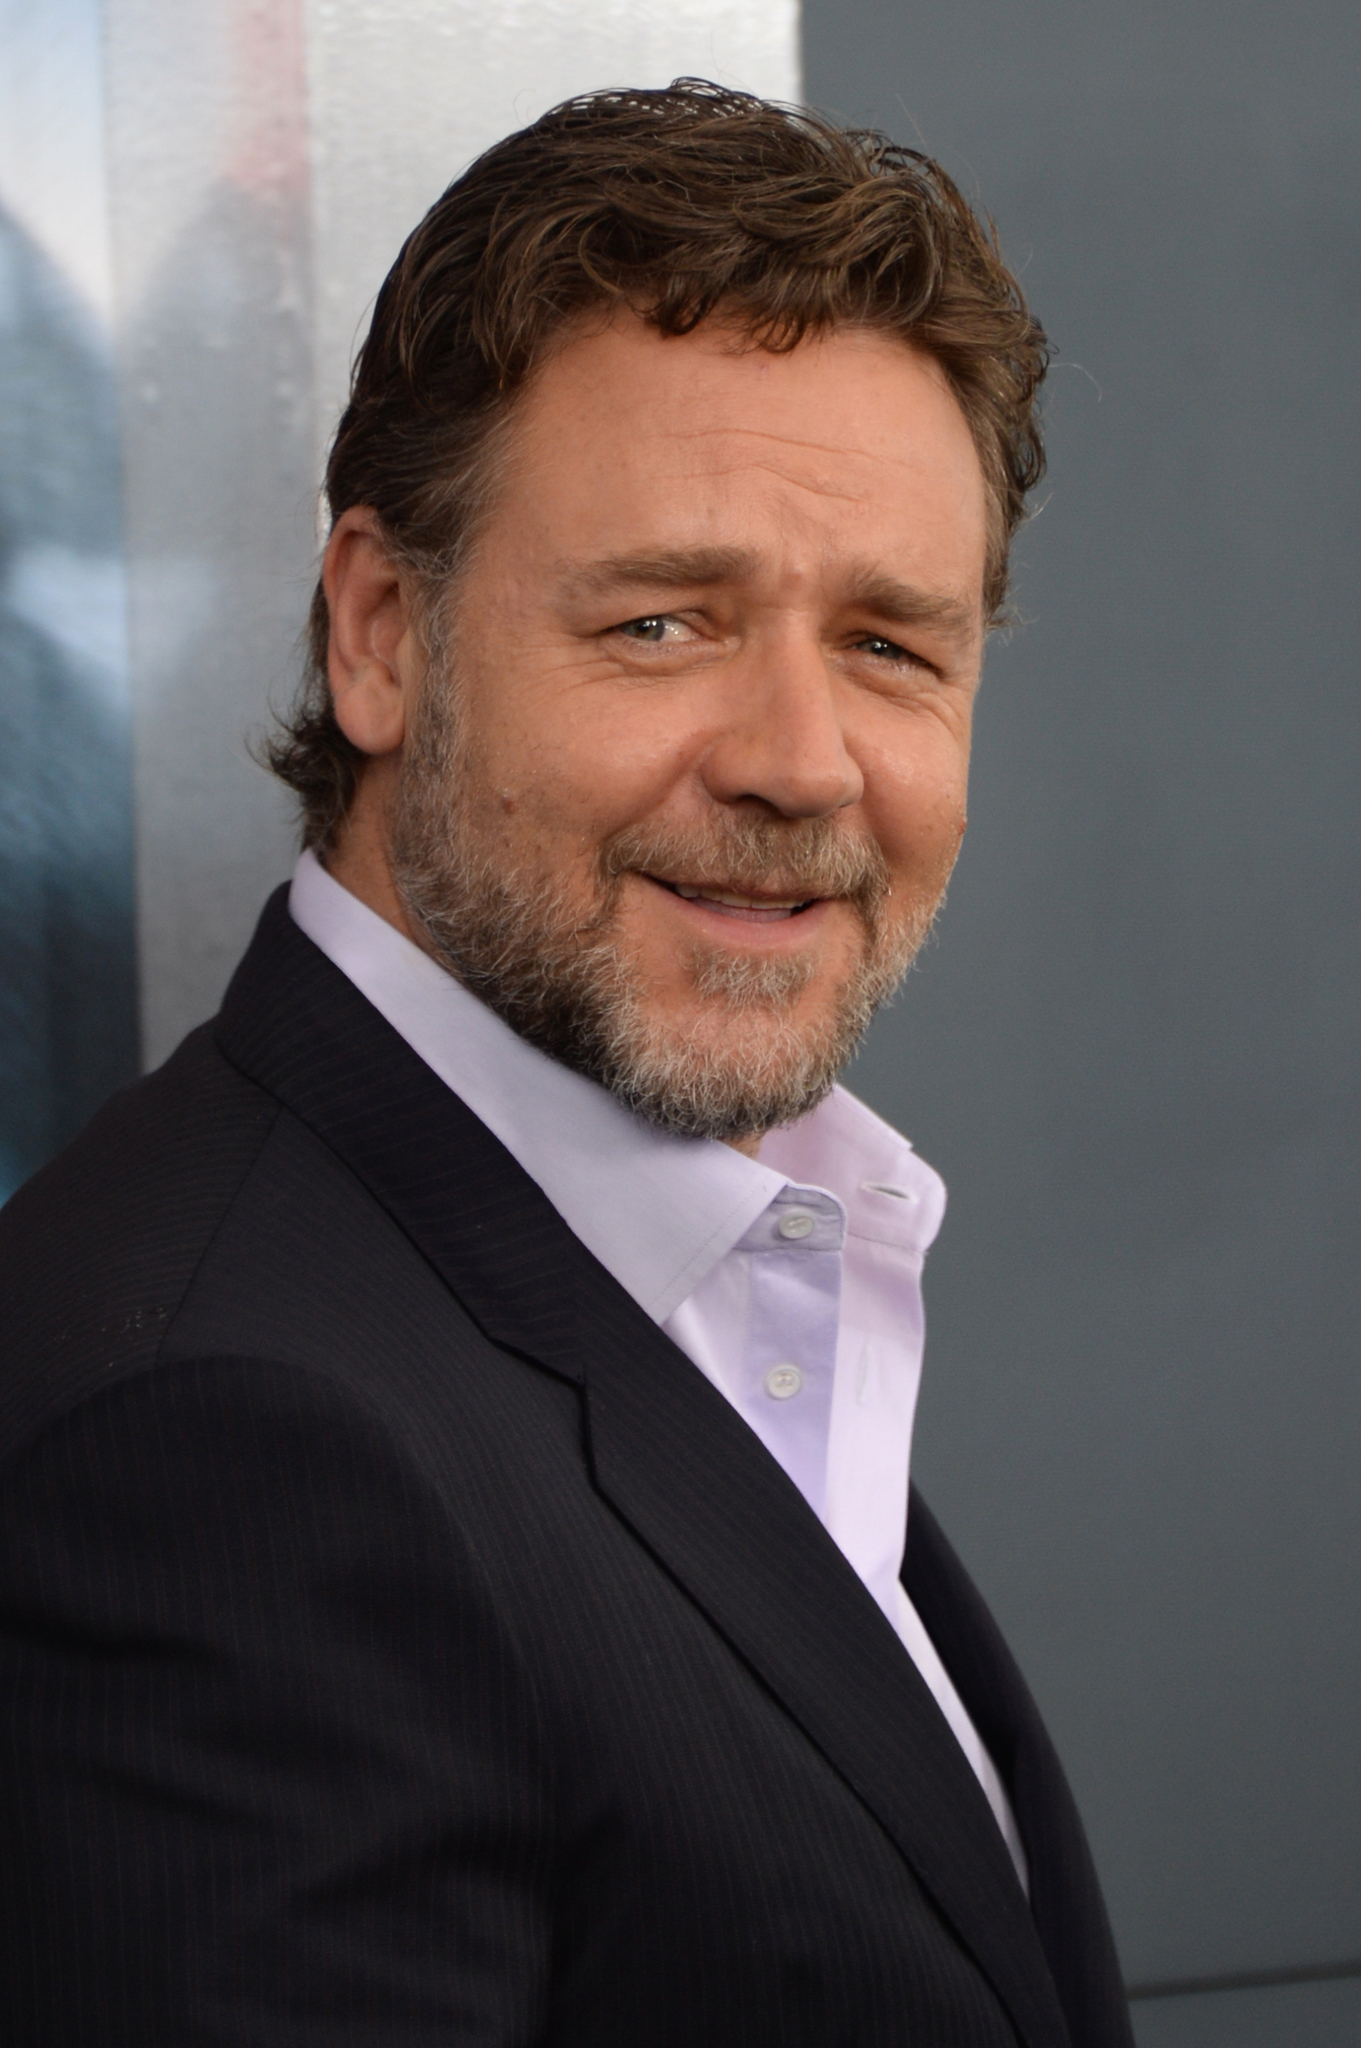 Russell Crowe at event of Zmogus is plieno (2013)